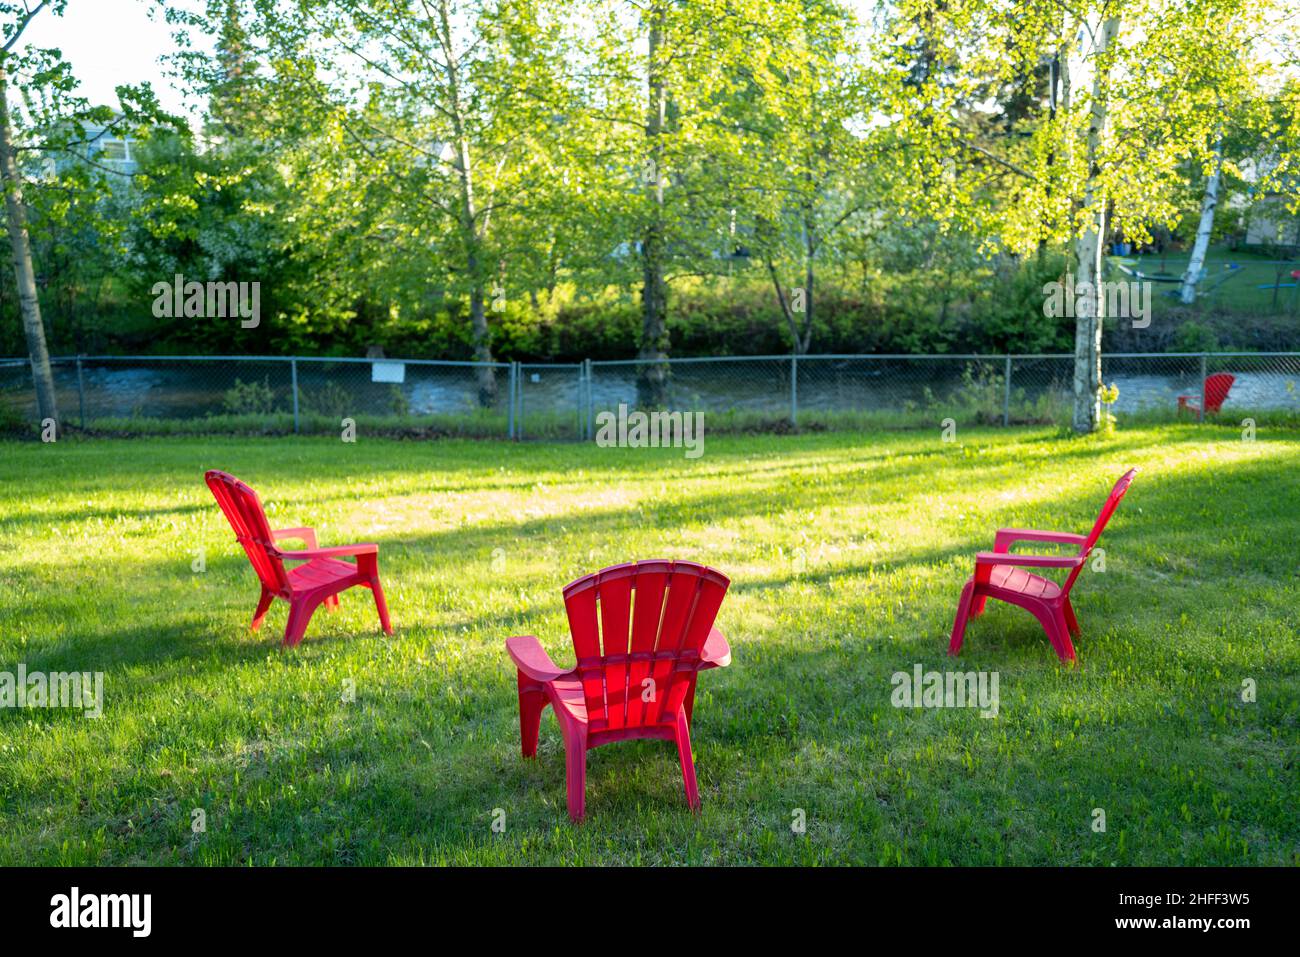 Social distancing in the backyard Stock Photo